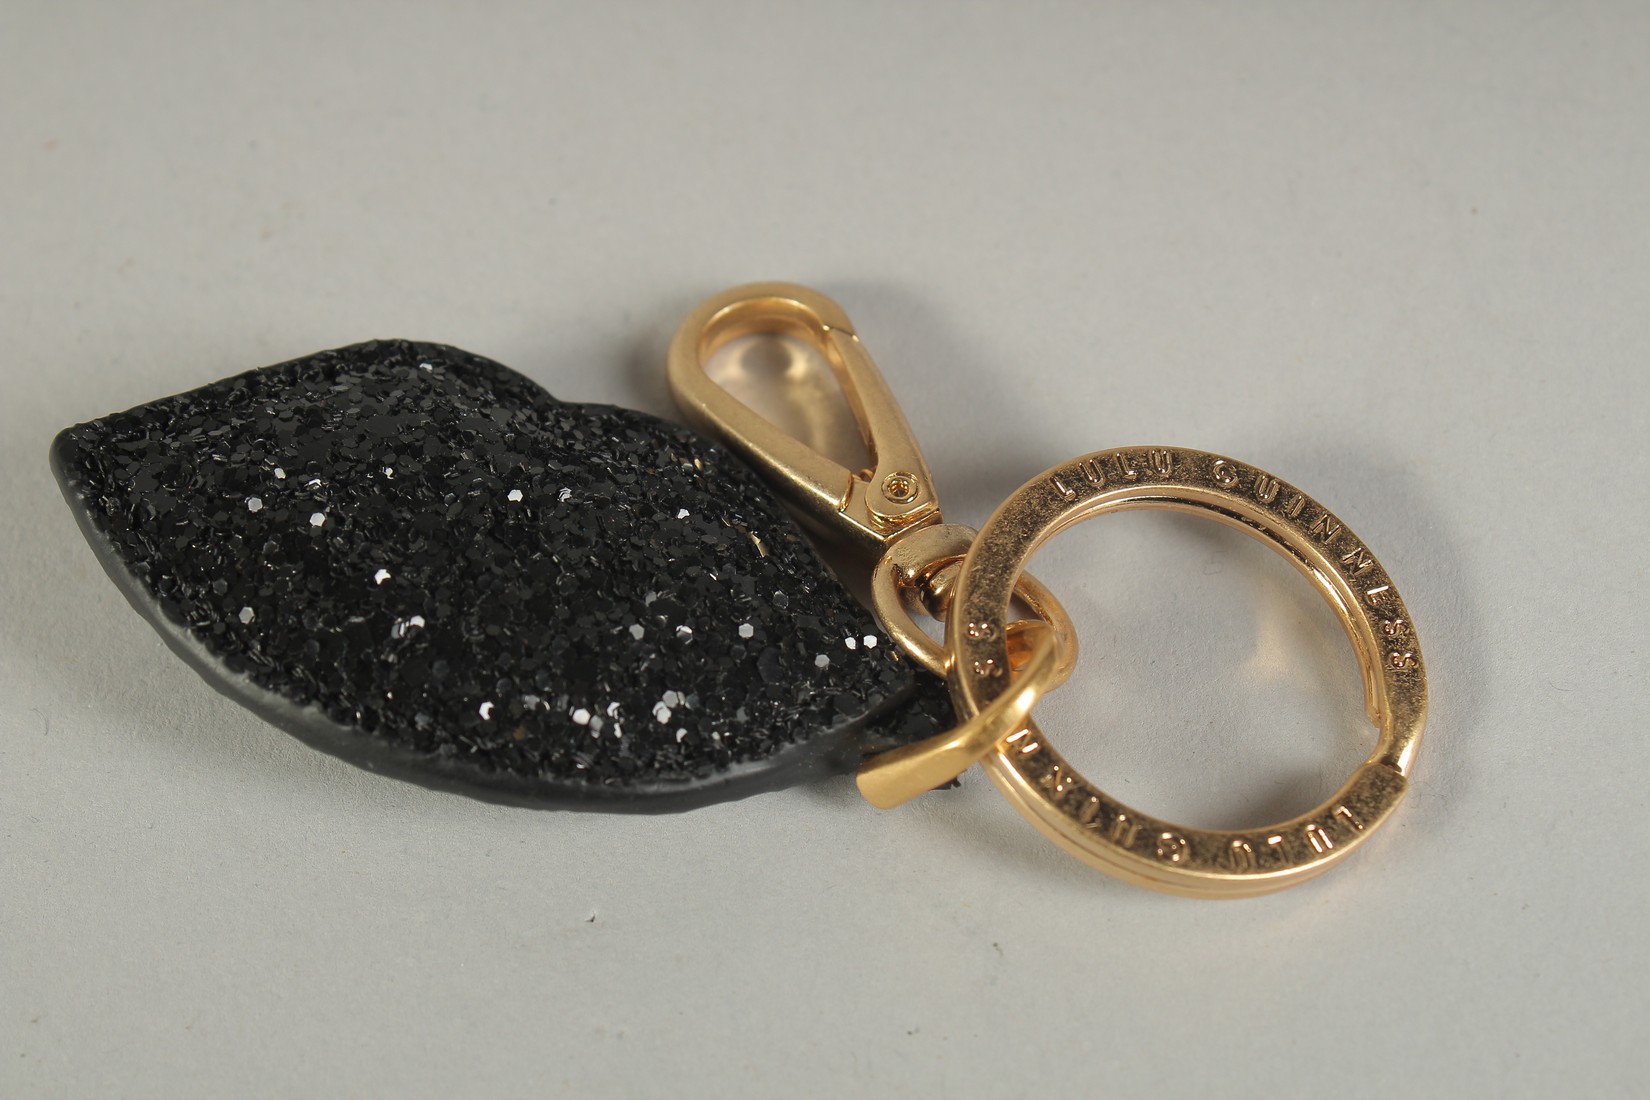 A LULU GUINNESS KEY RING in original box. - Image 2 of 2